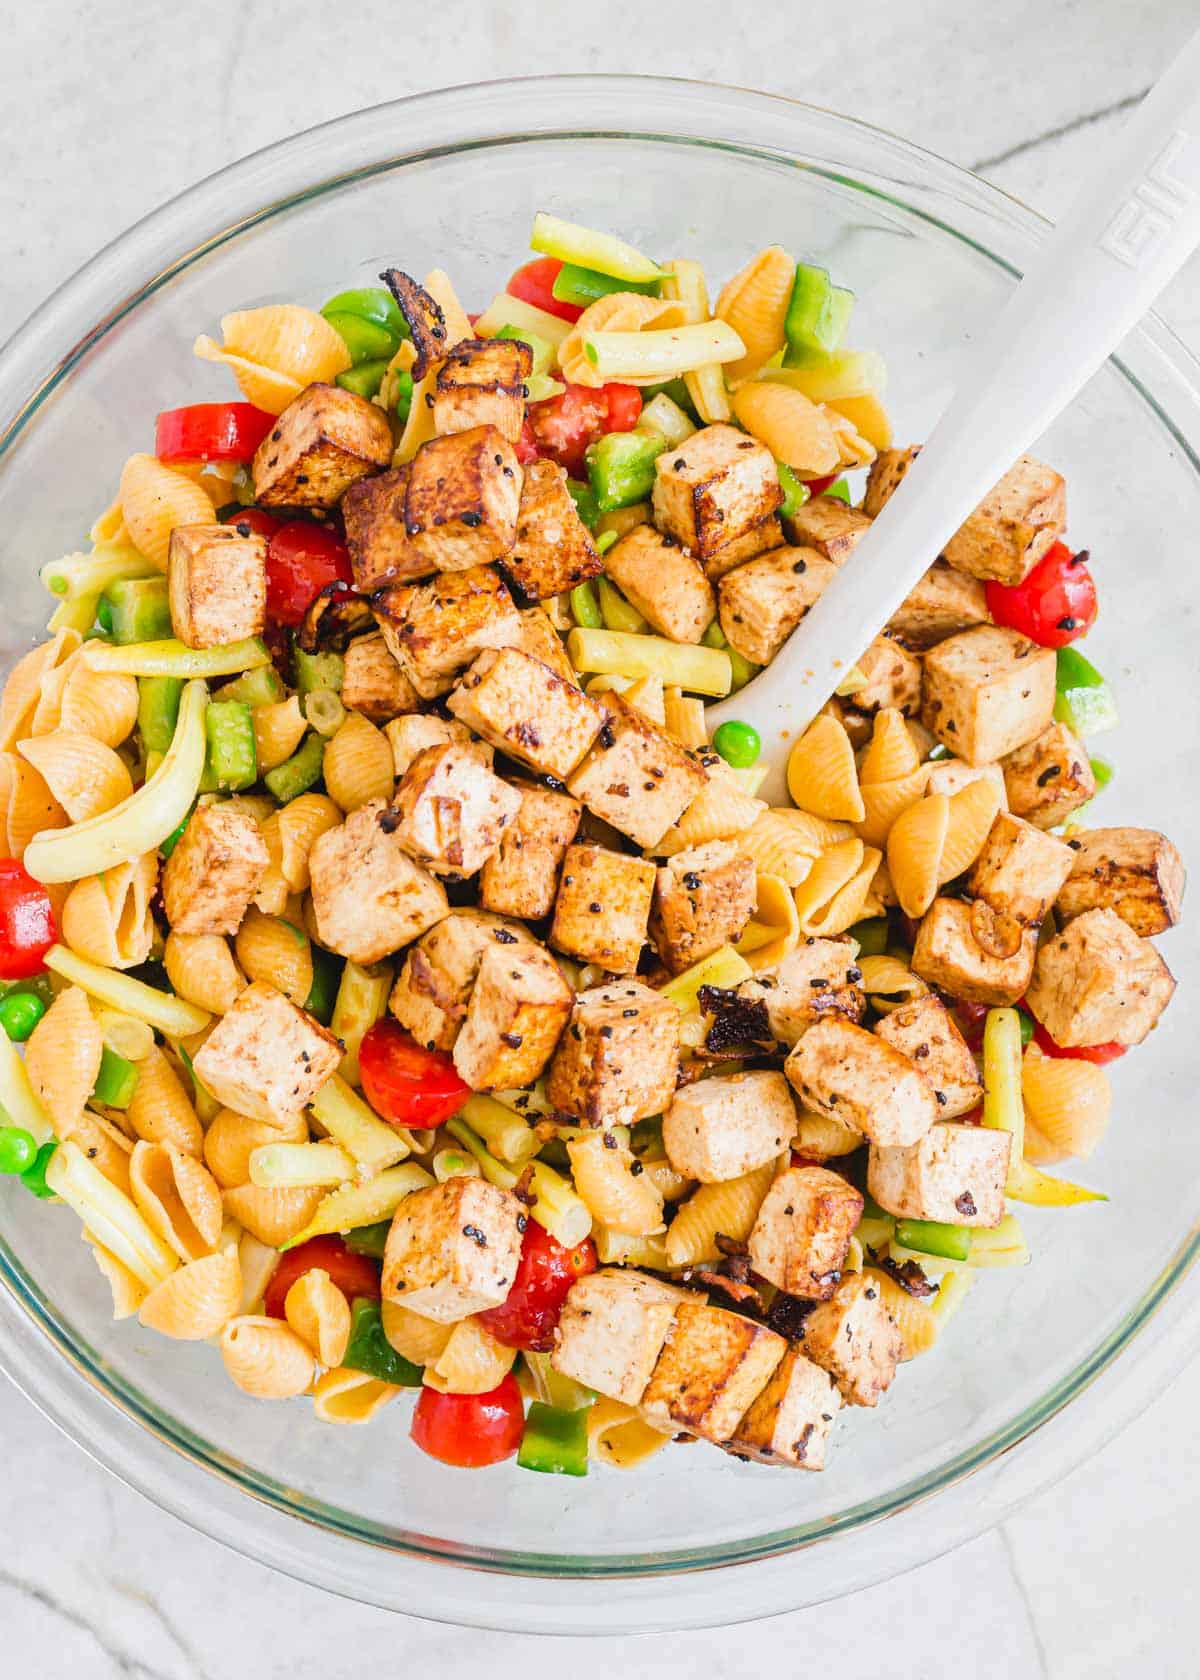 Skillet cooked tofu on top of pasta salad in a glass bowl with a white spatula.